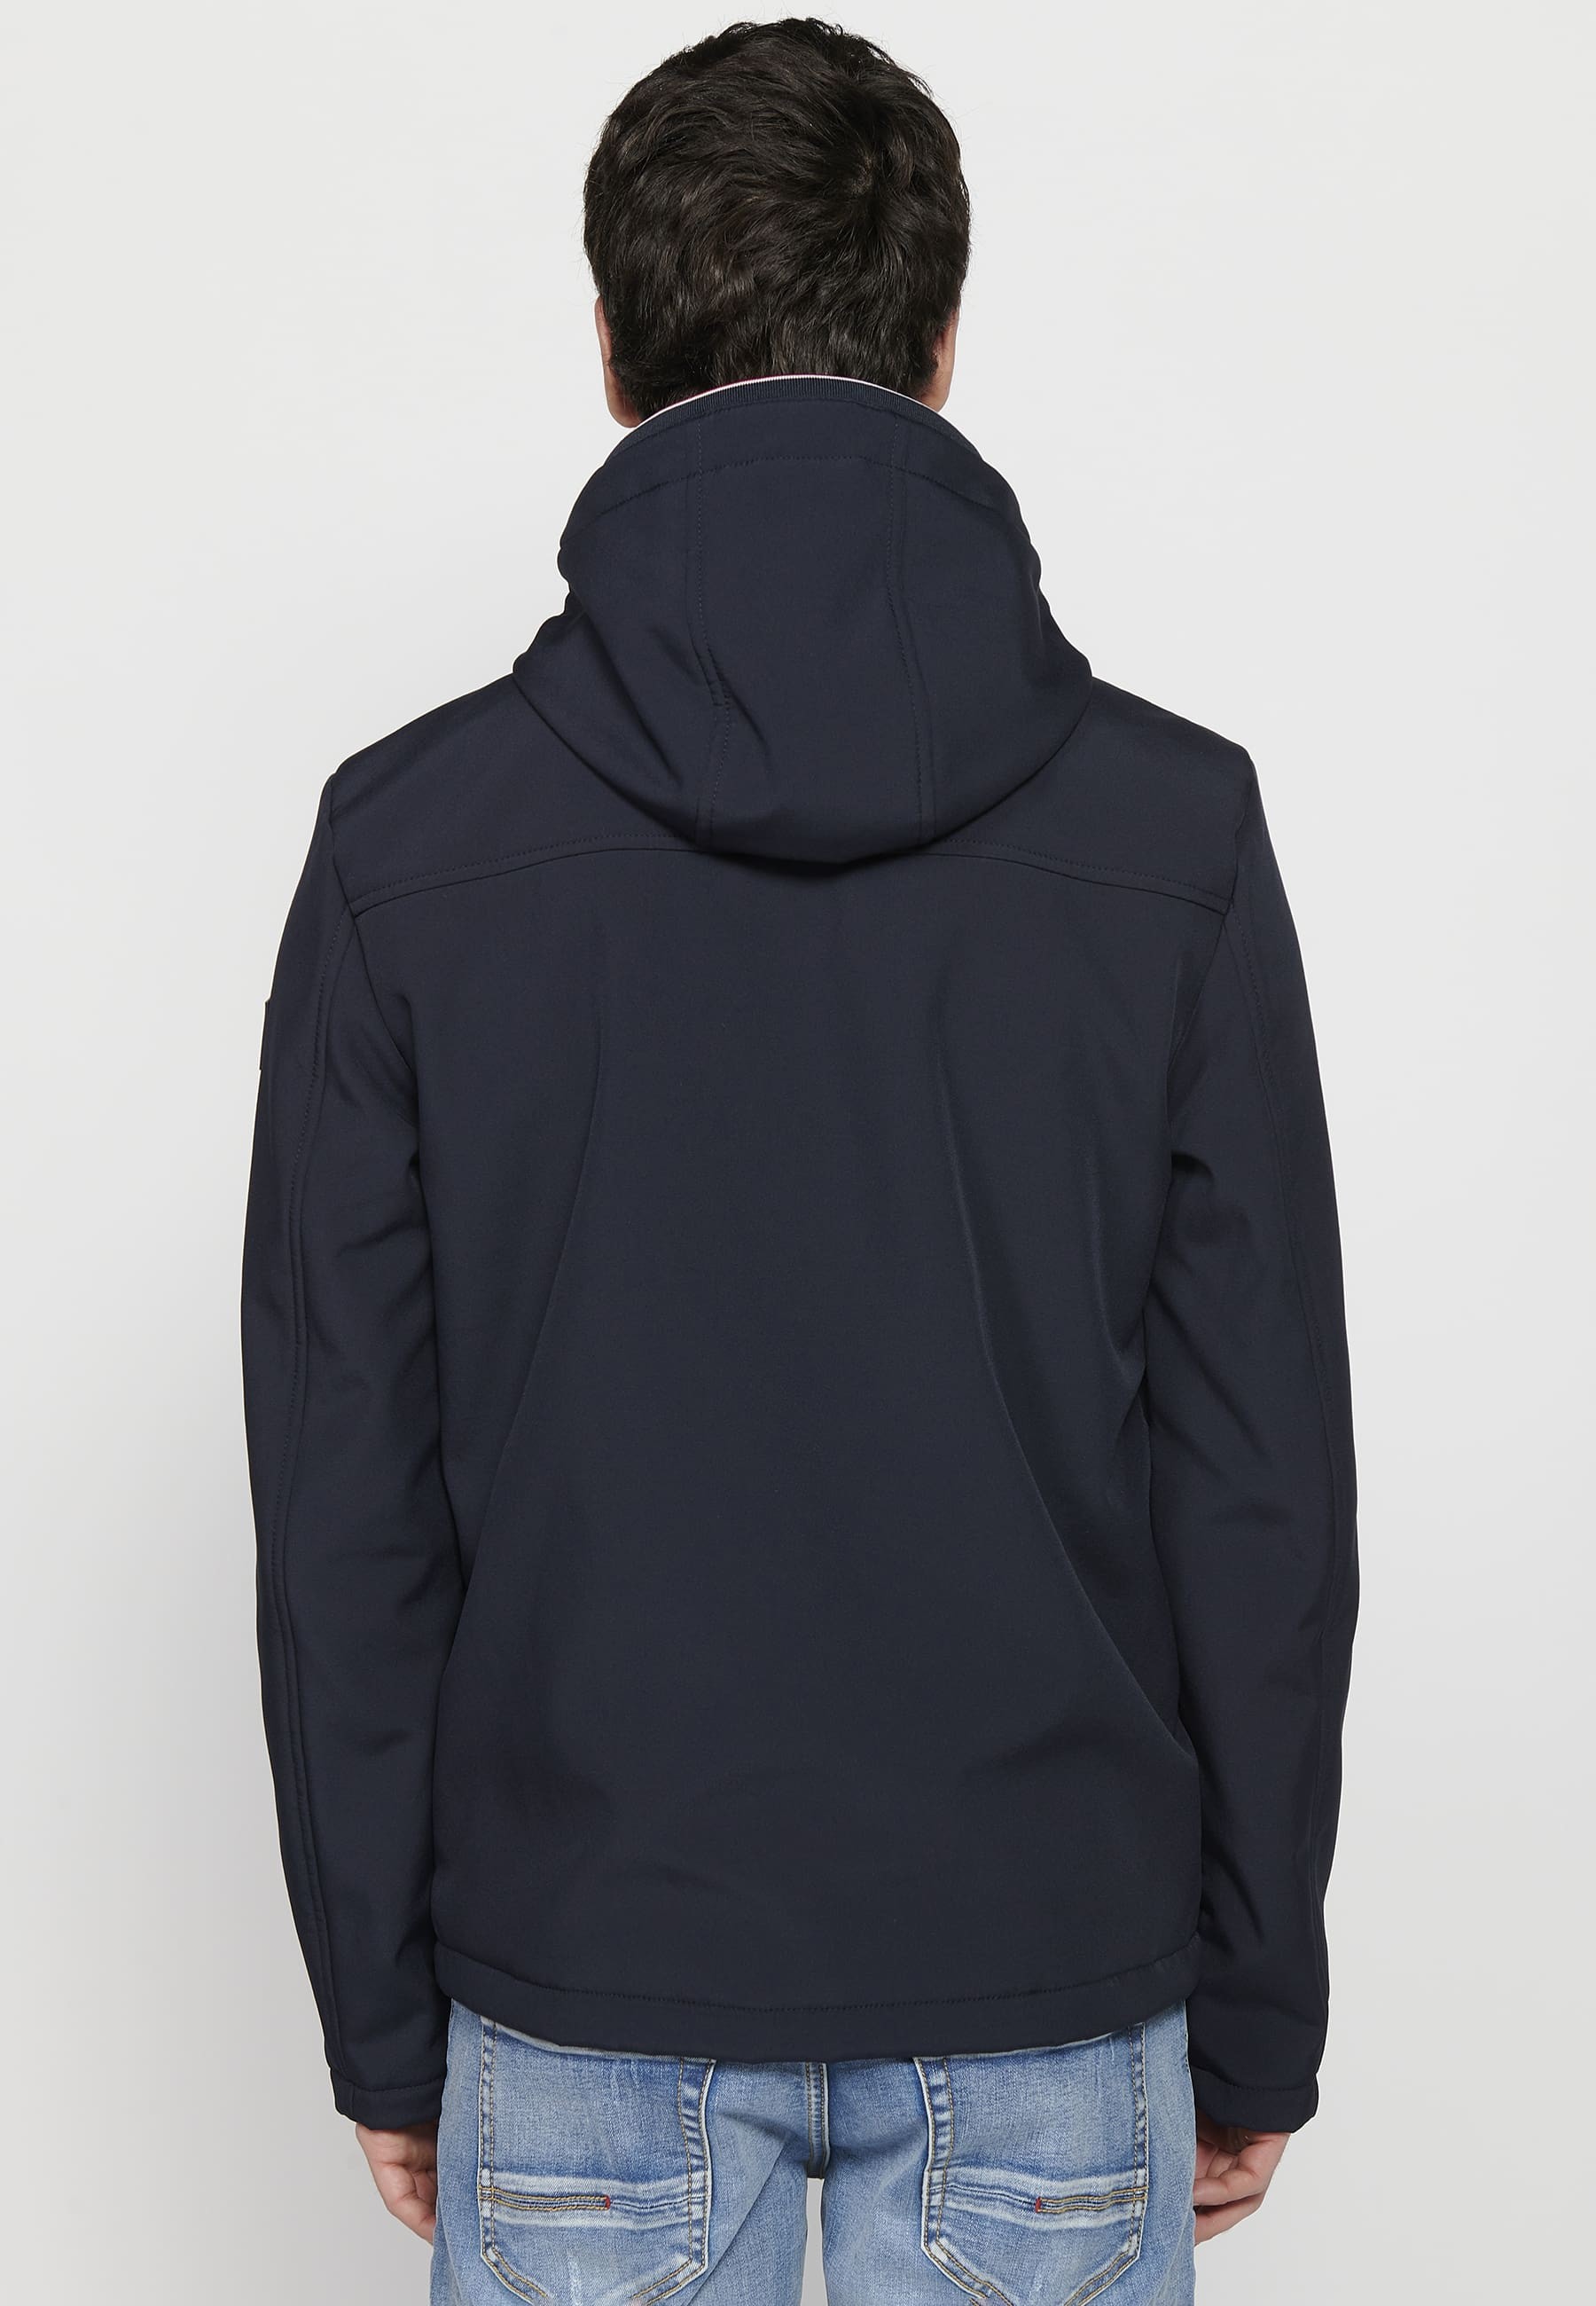 Navy Long Sleeve Jacket with Hooded Collar and Front Zipper Closure for Men 2